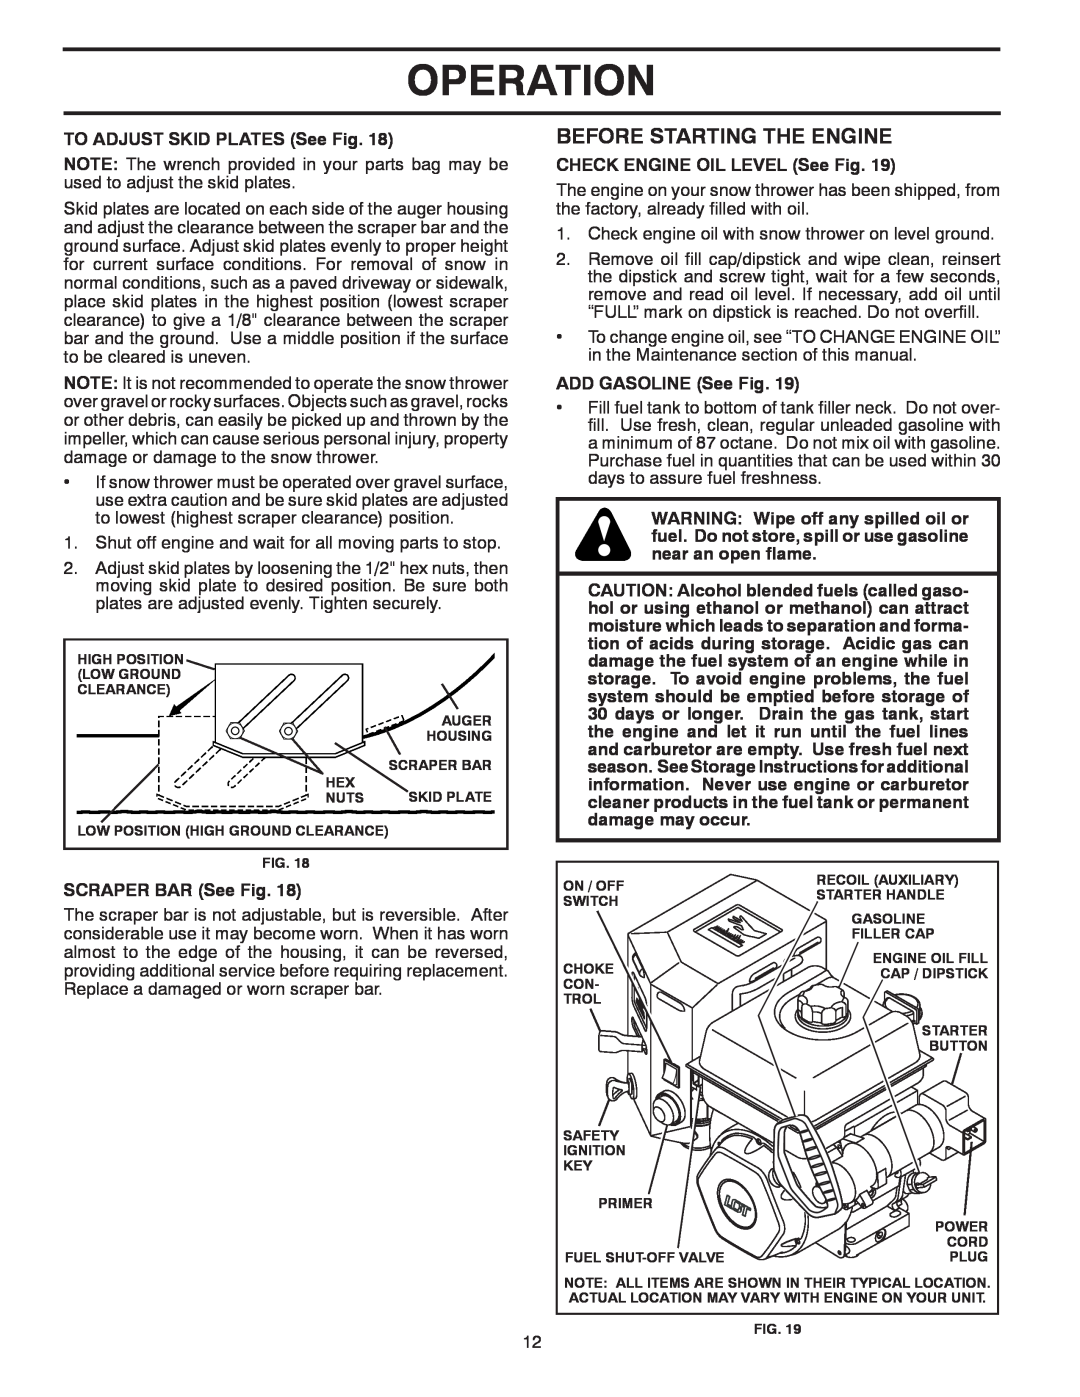 Poulan 428556 owner manual Before Starting The Engine, Operation, TO ADJUST SKID PLATES See Fig, SCRAPER BAR See Fig 